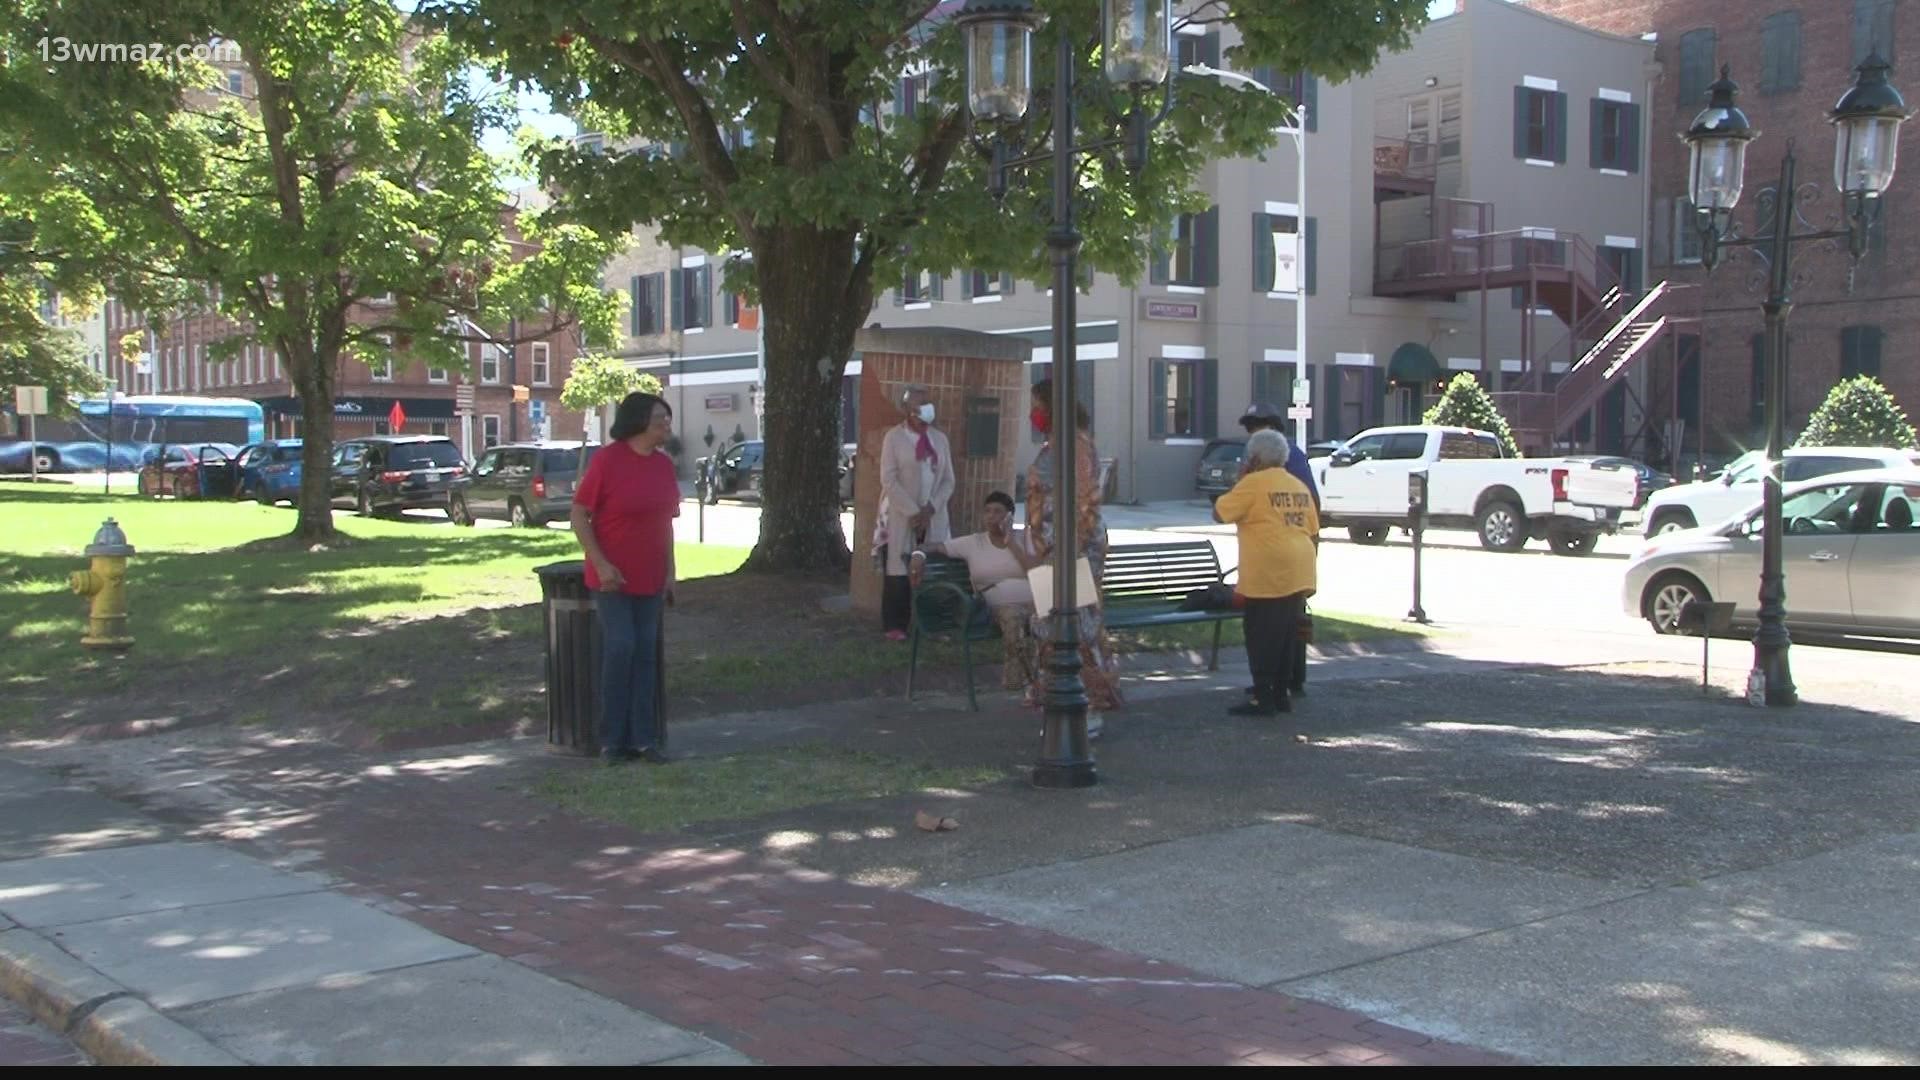 Members of the Macon NAACP chapter met in the city’s downtown Friday to speak out against what they believe are unfair practices against tenants in the area.